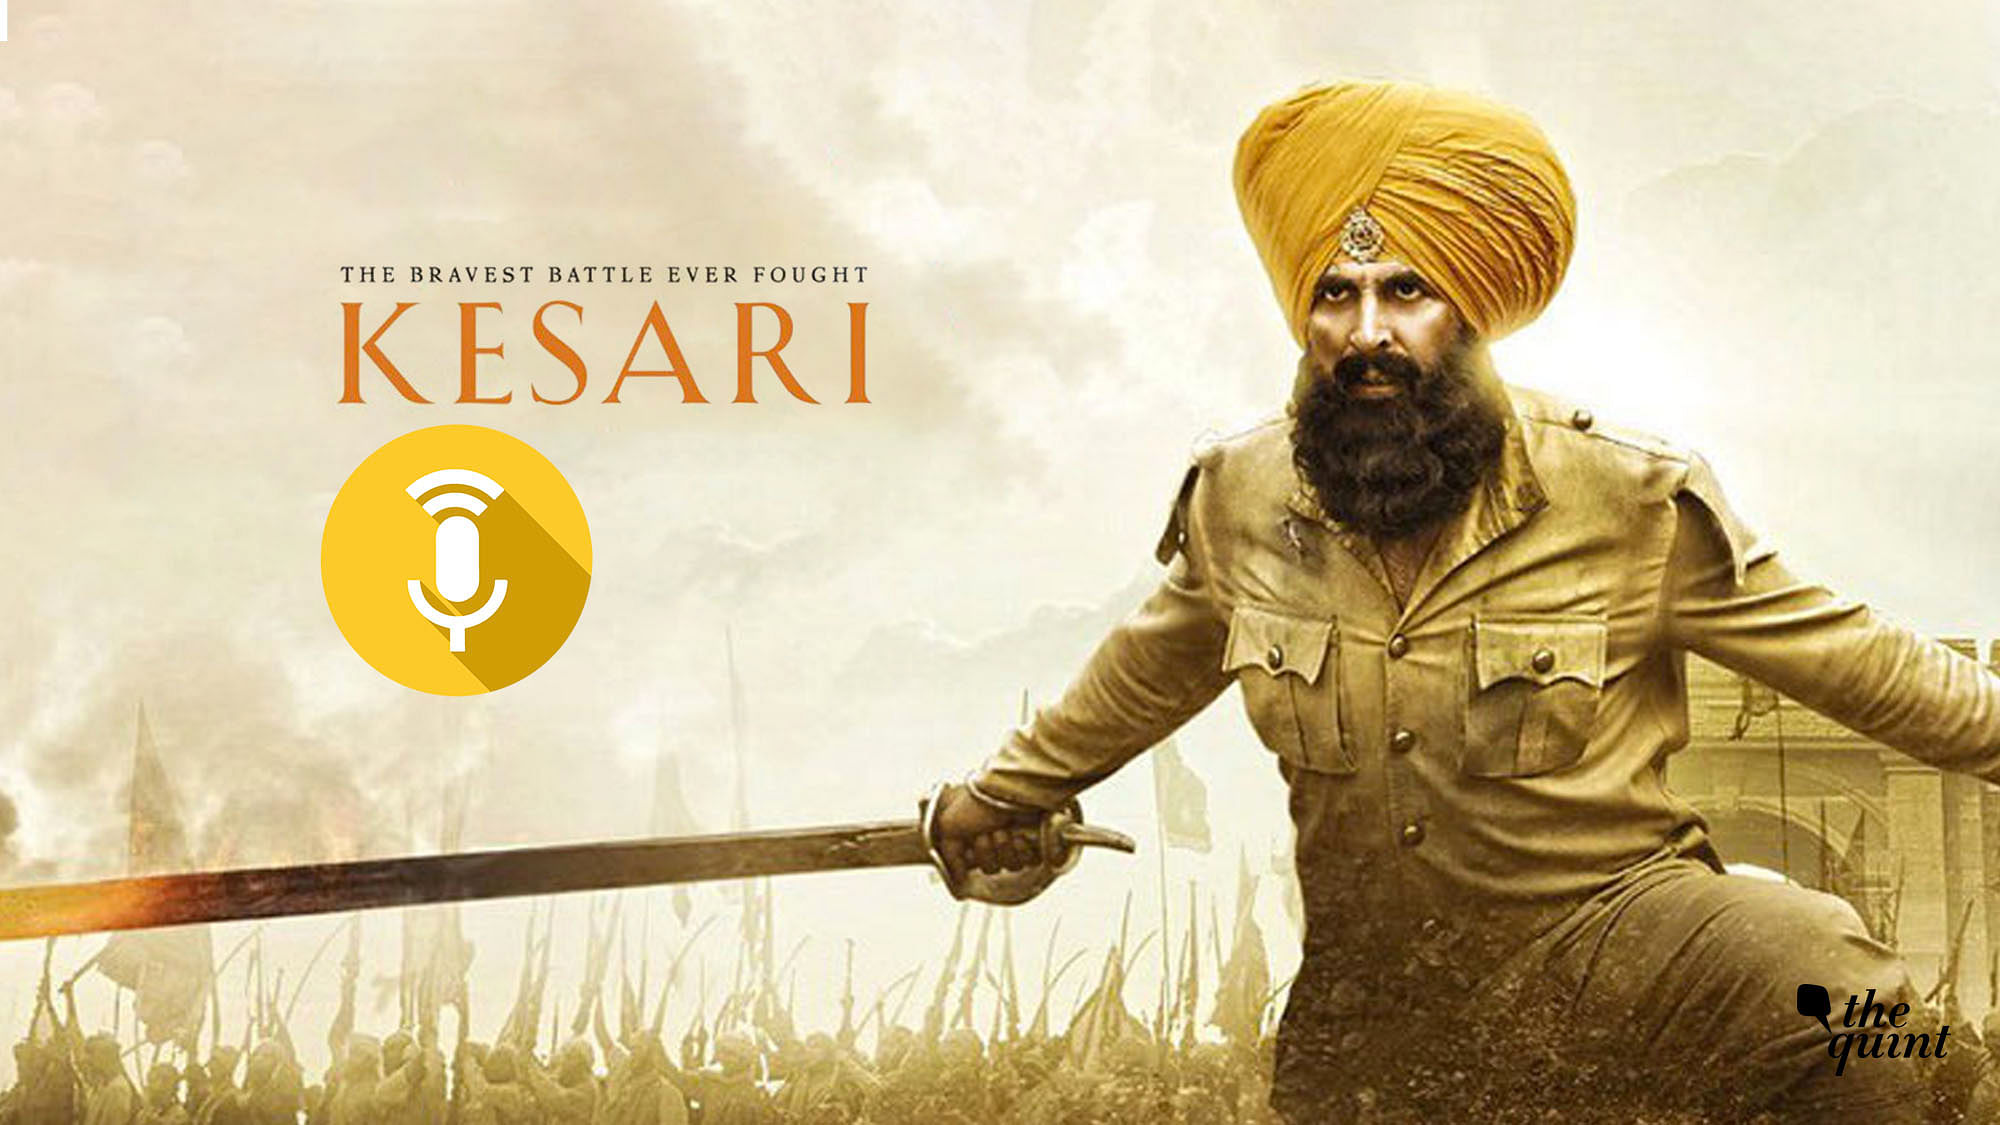 In Kesari, we are introduced to Havaldar Ishar Singh (Akshay Kumar), an upright soldier in the British Indian Army who routinely gets into trouble with his seniors for his headstrong opinion on justice and service.